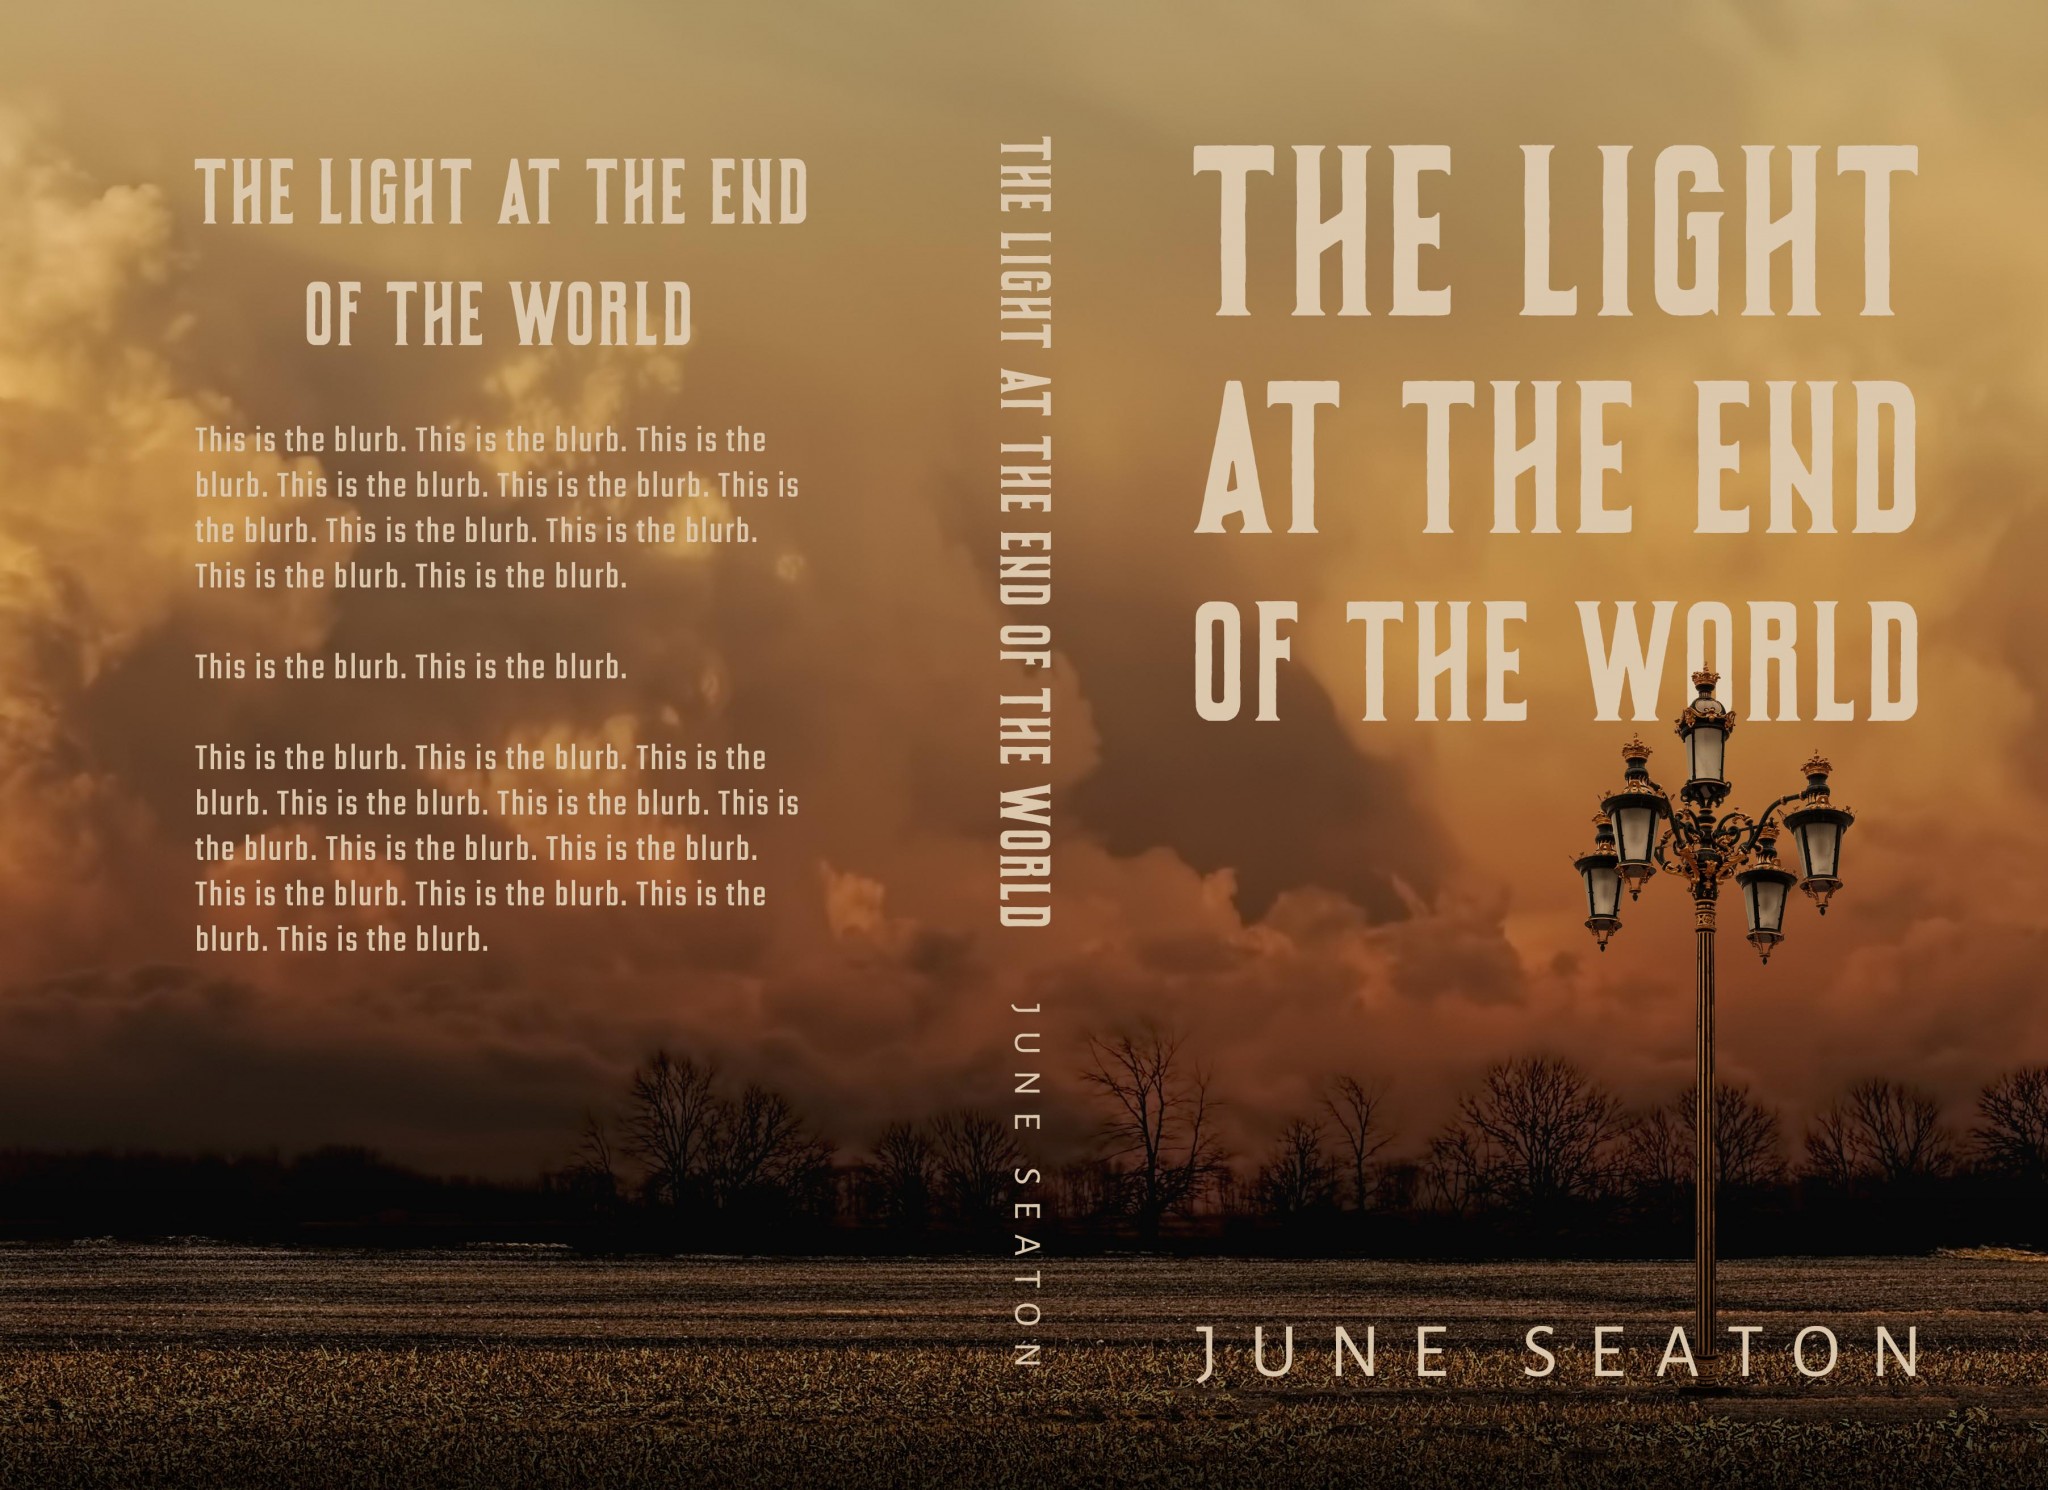 The Light At The End Of The World (ebook + print) - The Book Cover ...